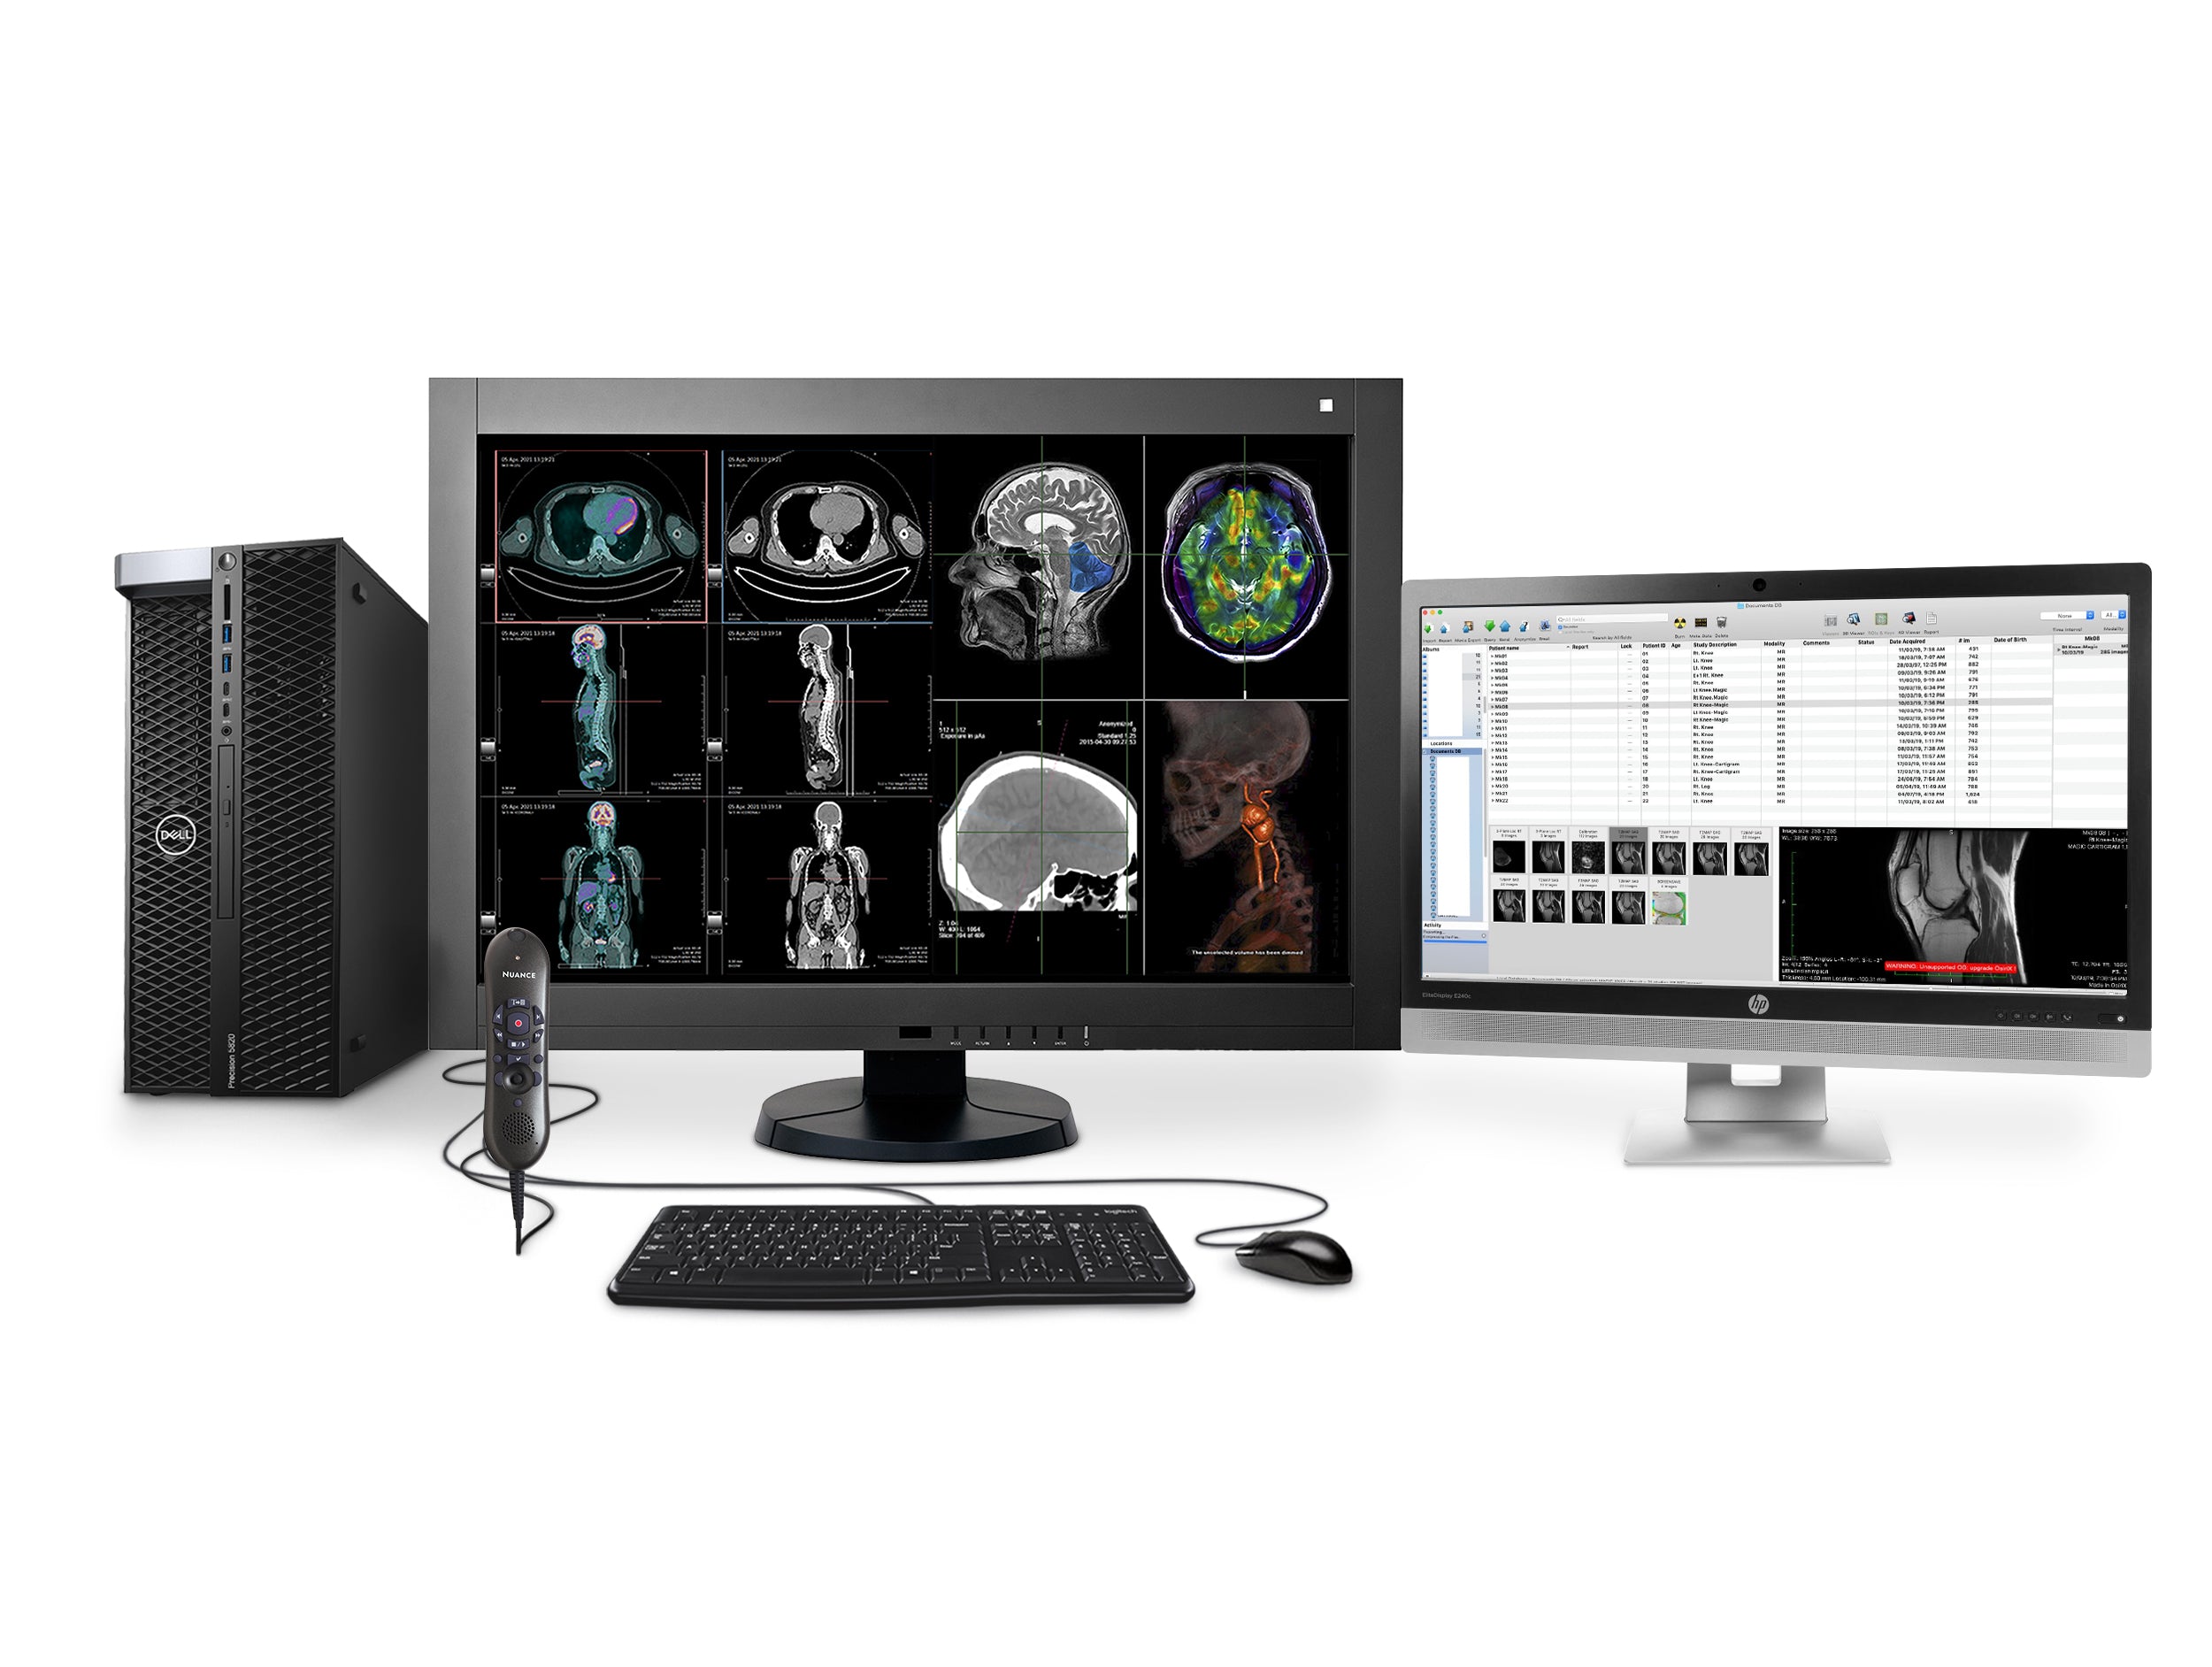 Complete PACS General Radiology Station | Eizo 4MP Color LED Displays | Dell Workstation | Dictation Mic | Worklist Monitor (RX4405820) Monitors.com 